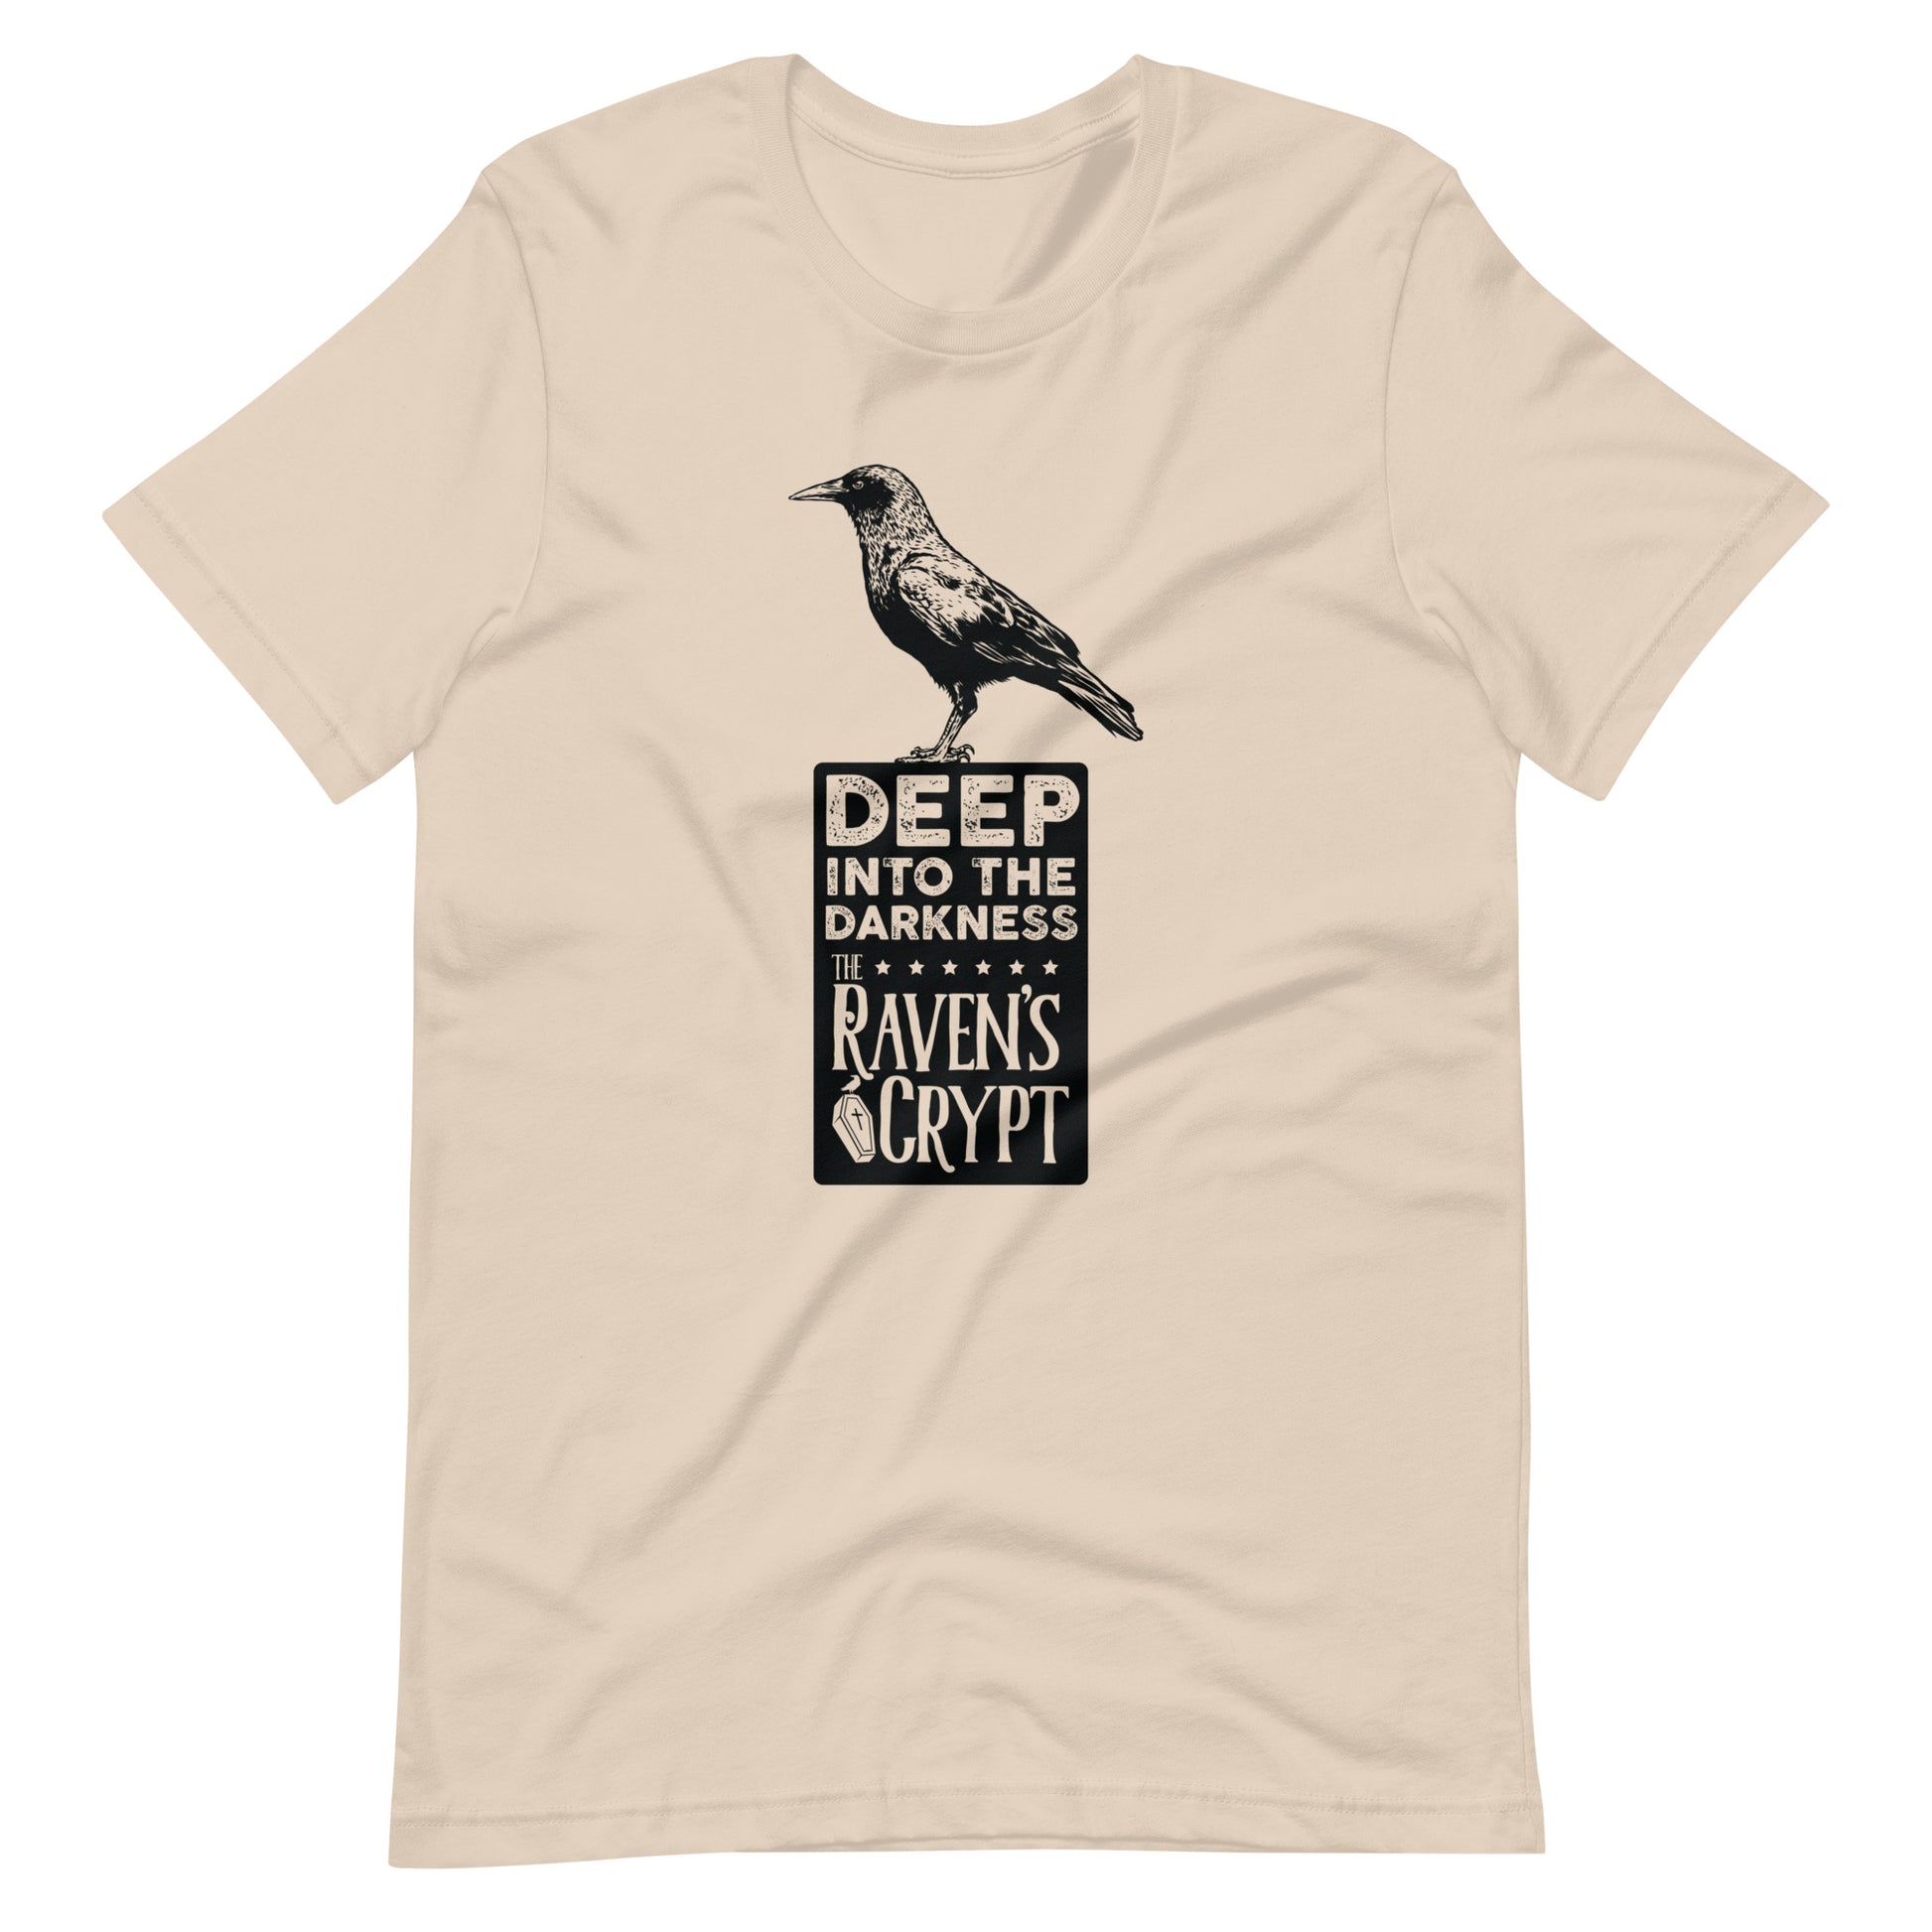 Deep Into the Darkness Crypt 2 - Men's t-shirt - Soft Cream From